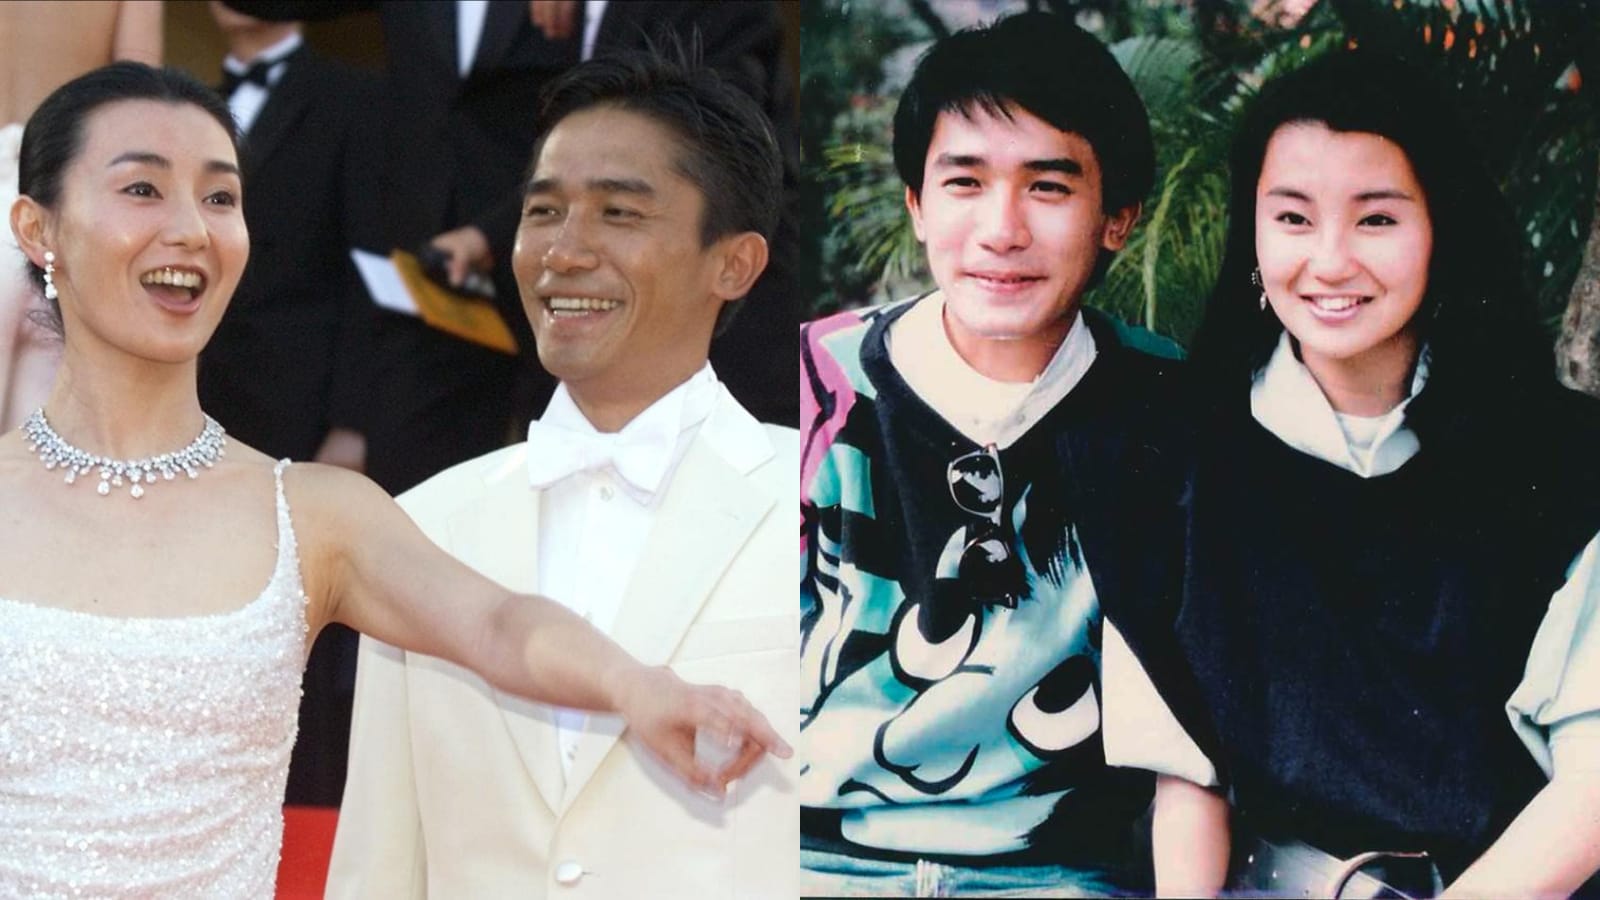 Tony Leung Once Told Maggie Cheung To “Go Home” After Scolding Her For Not Knowing How To Act